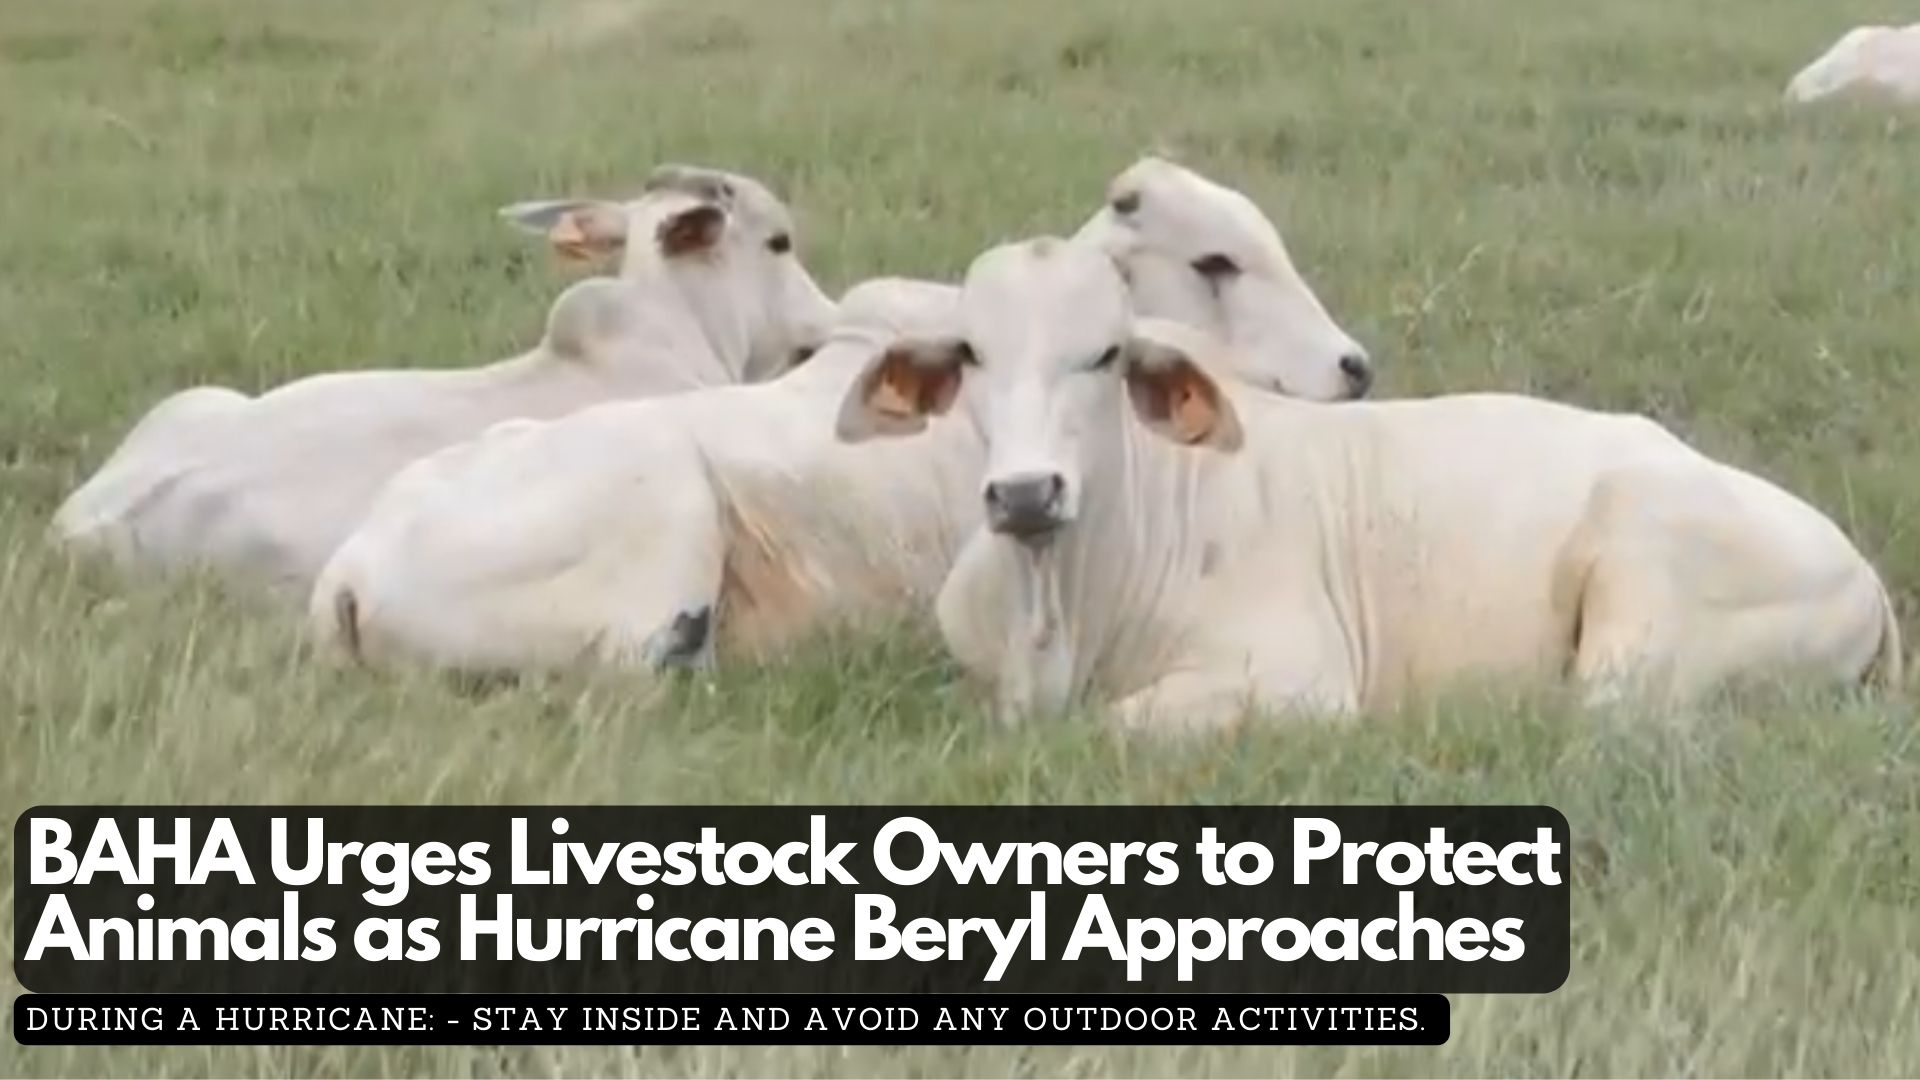 BAHA Urges Livestock Owners to Protect Animals as Hurricane Beryl Approaches